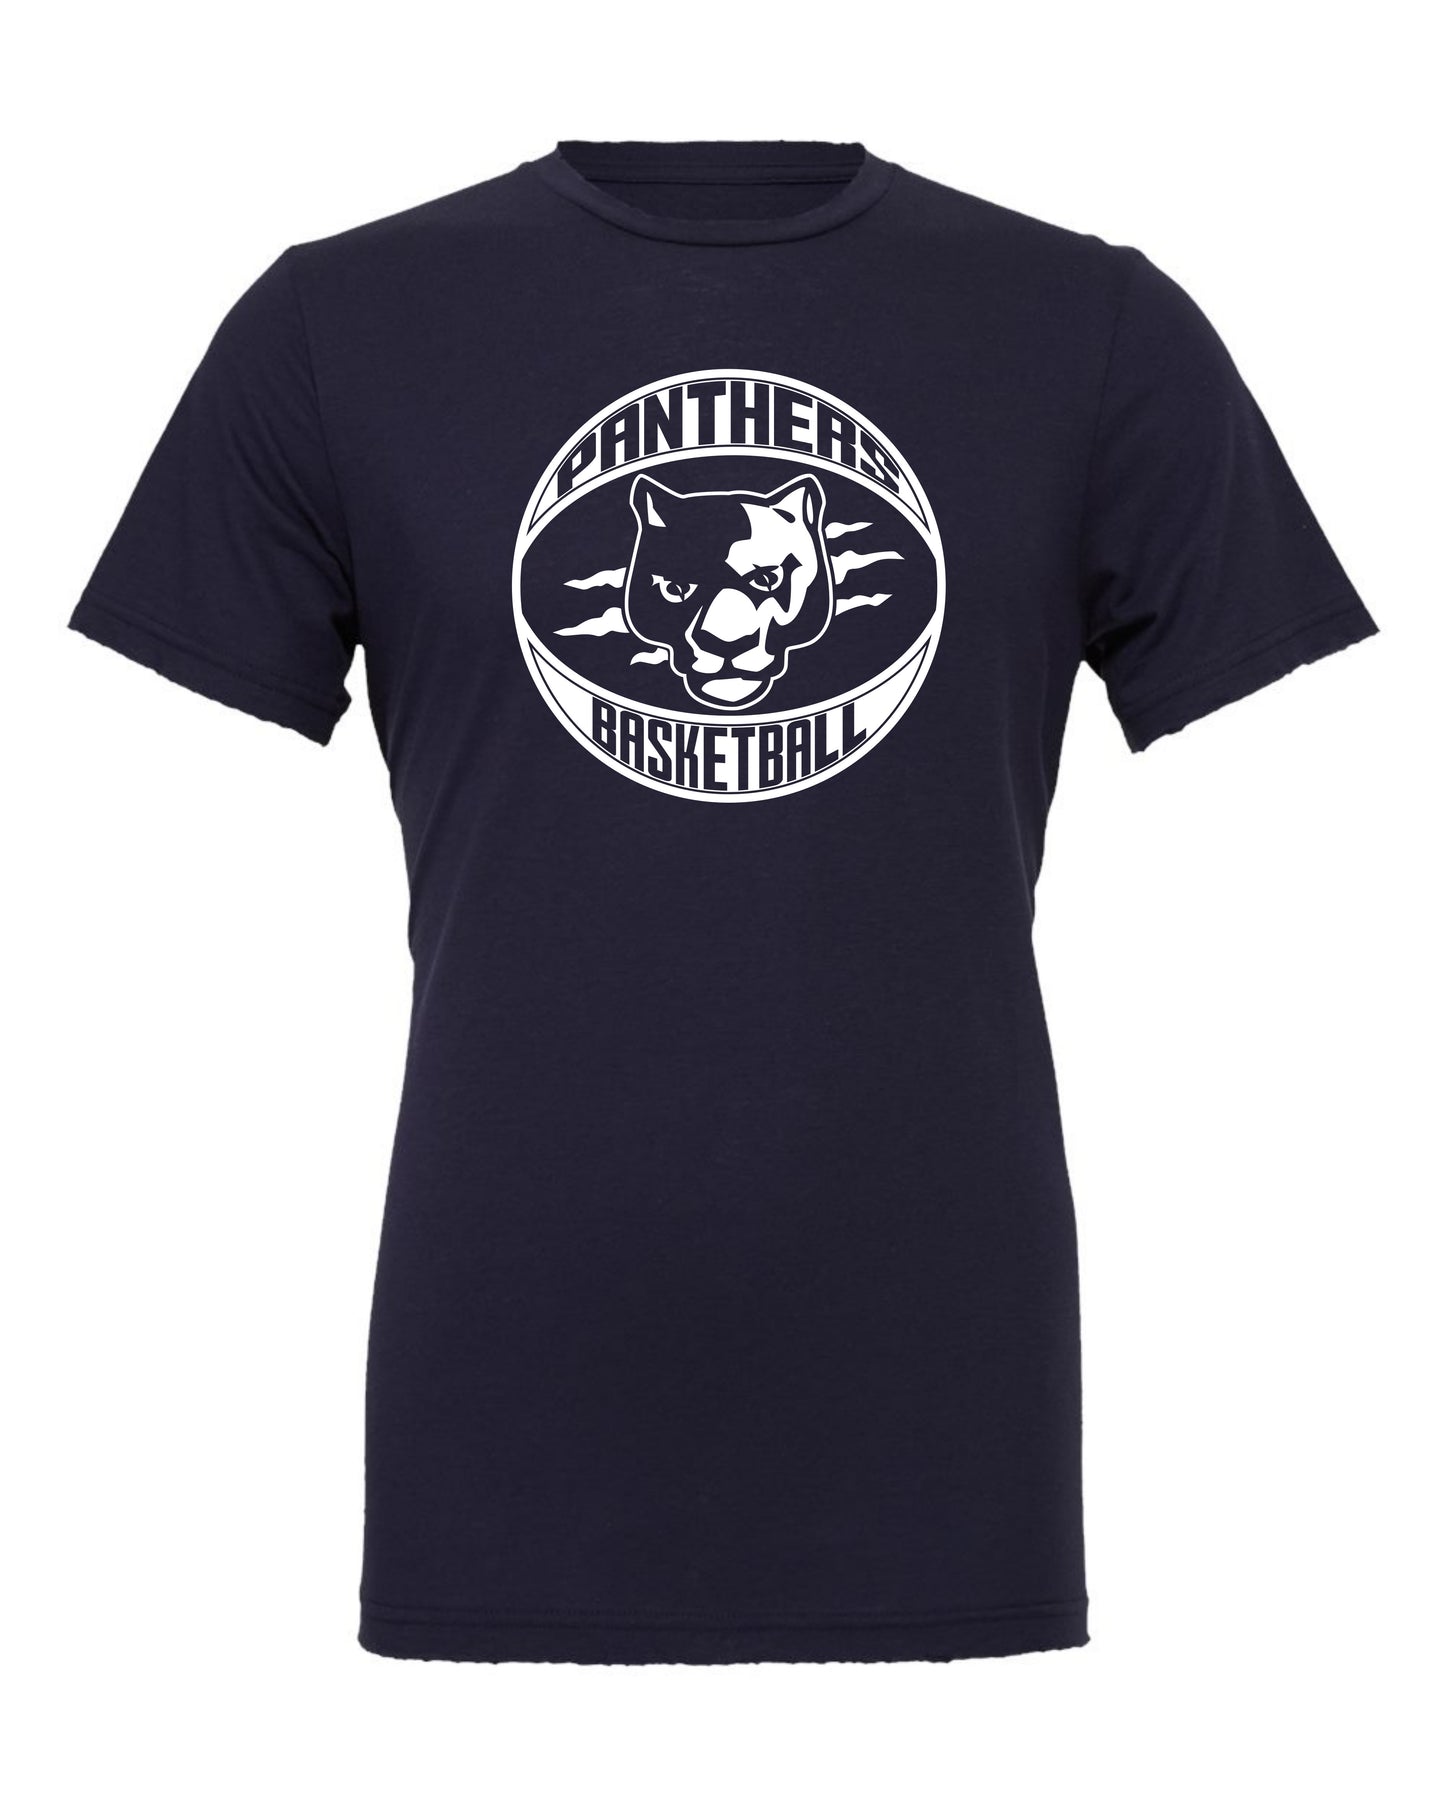 Panthers BBall Claw Ball - Adult Tee